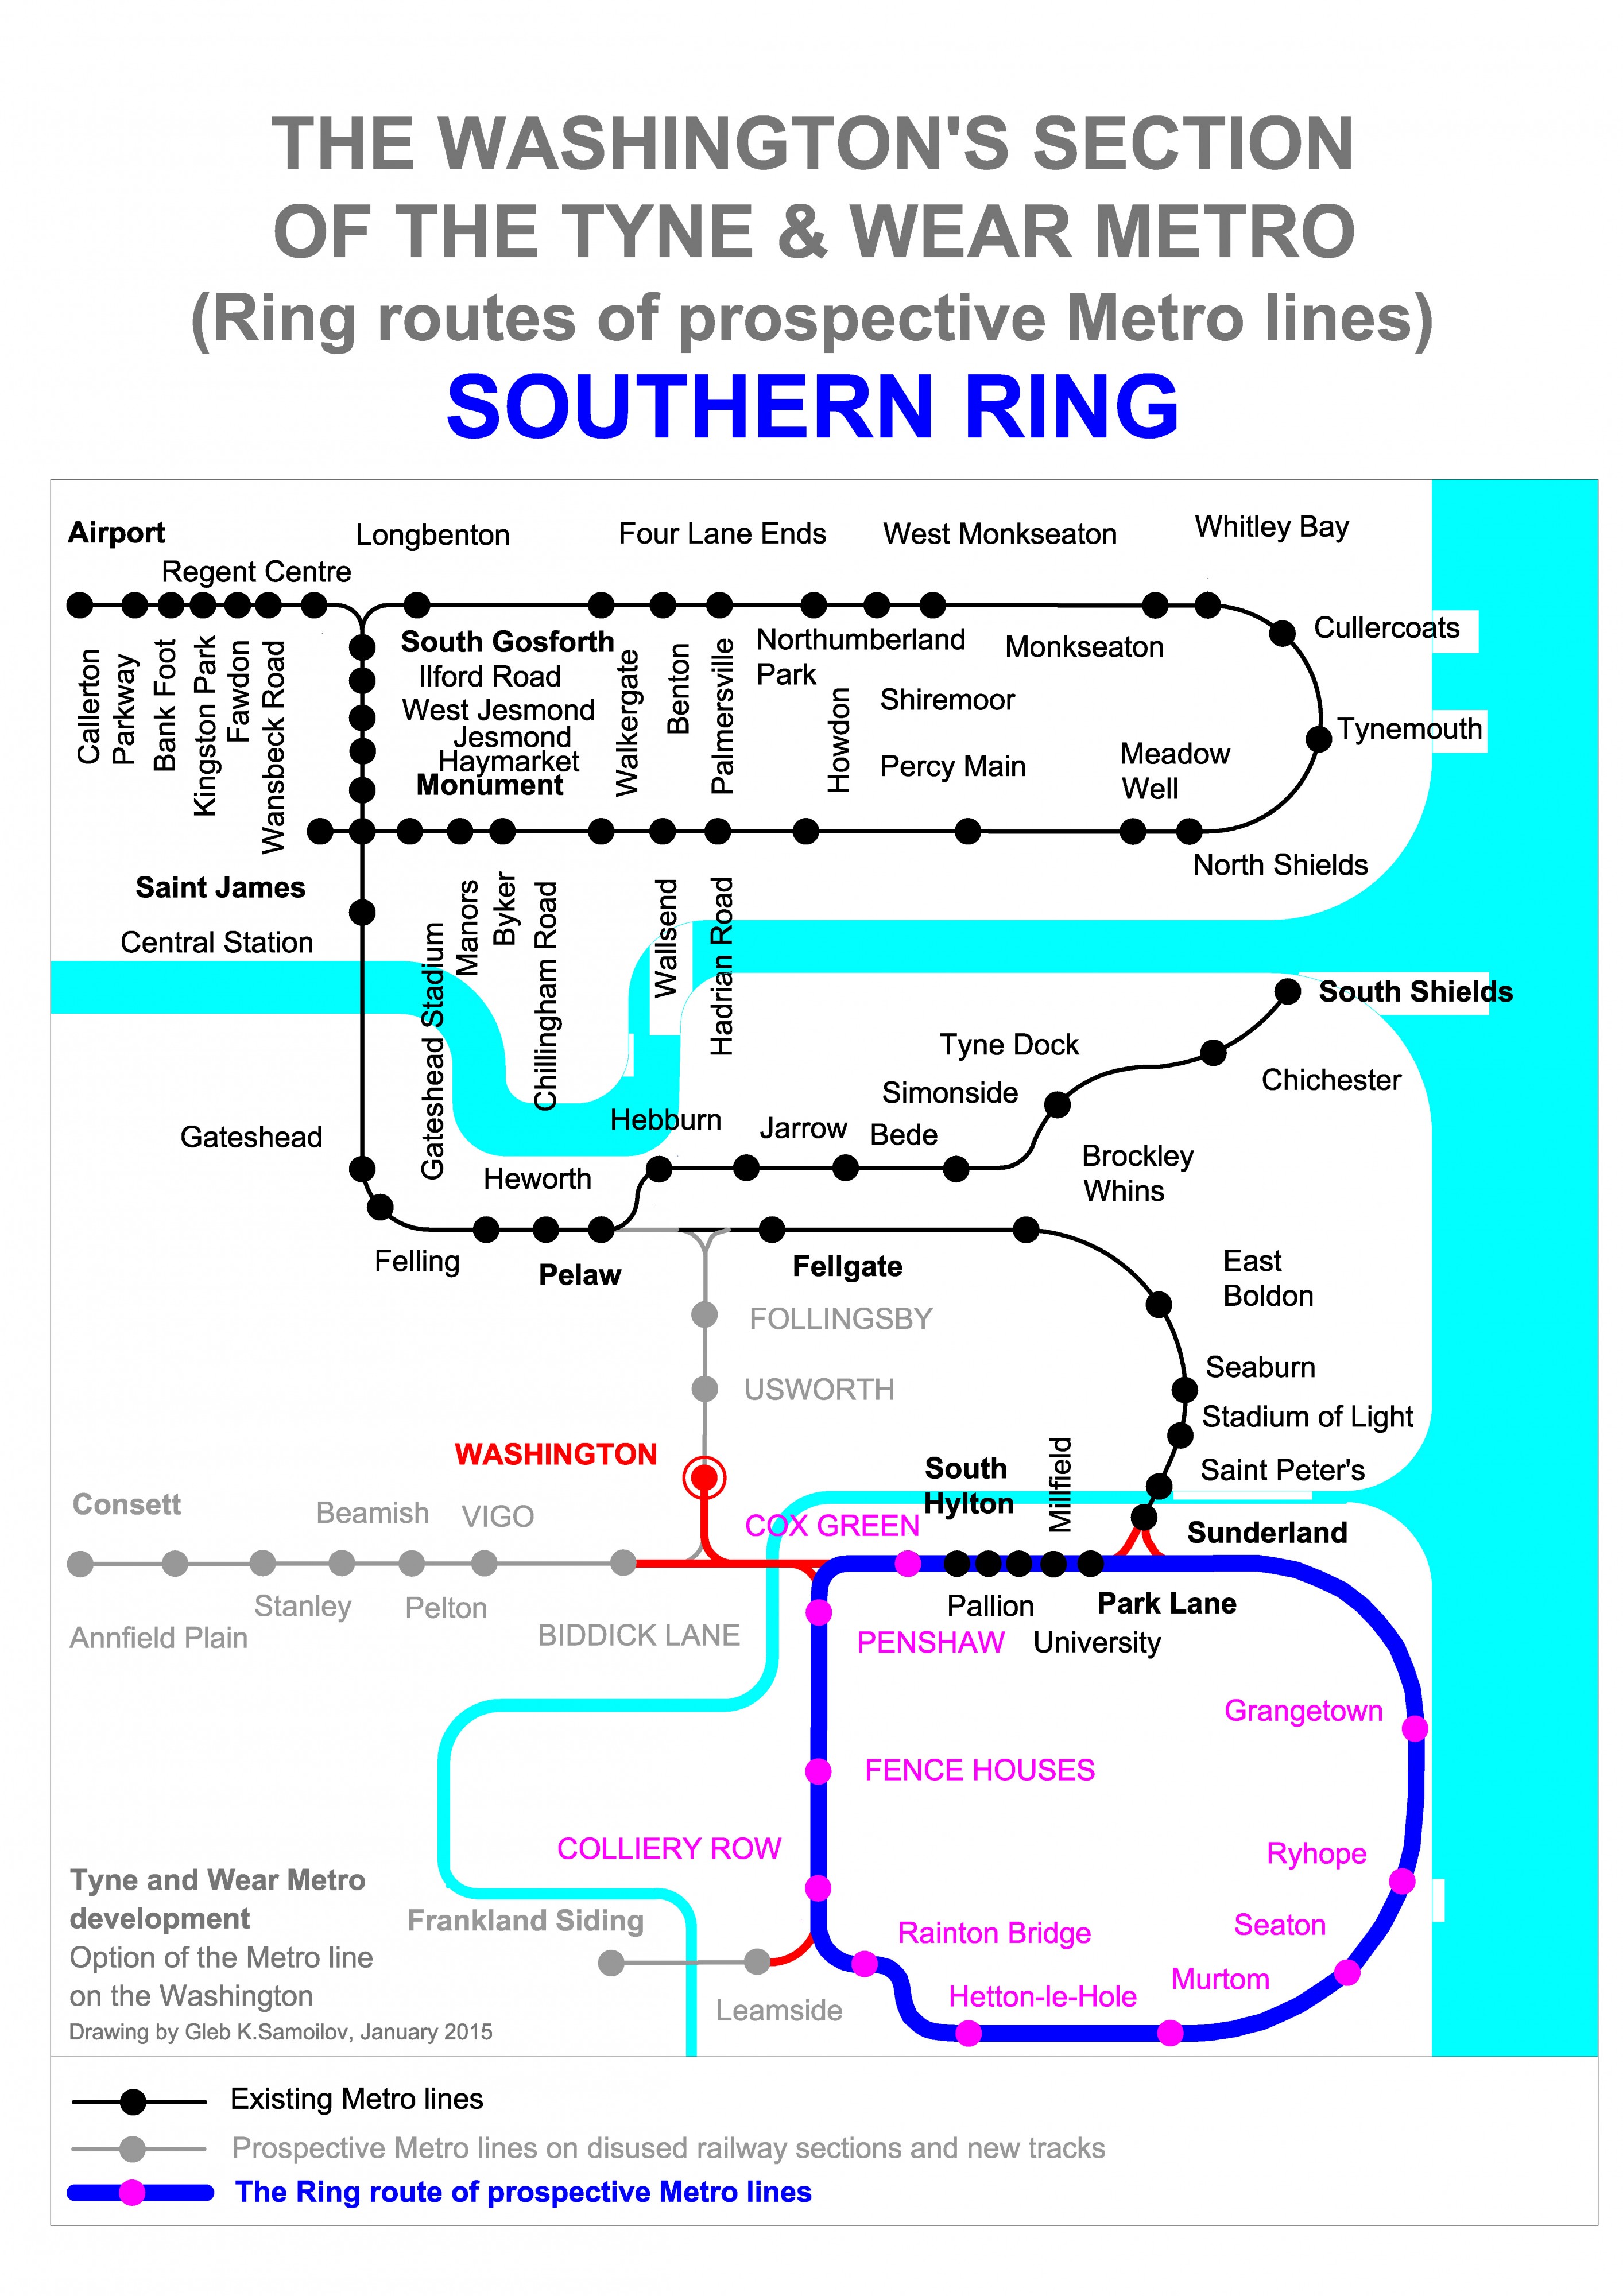 THE SOUTHERN RING - Ring route of prospective Tyne and Wear Metro lines at the Washington’s section